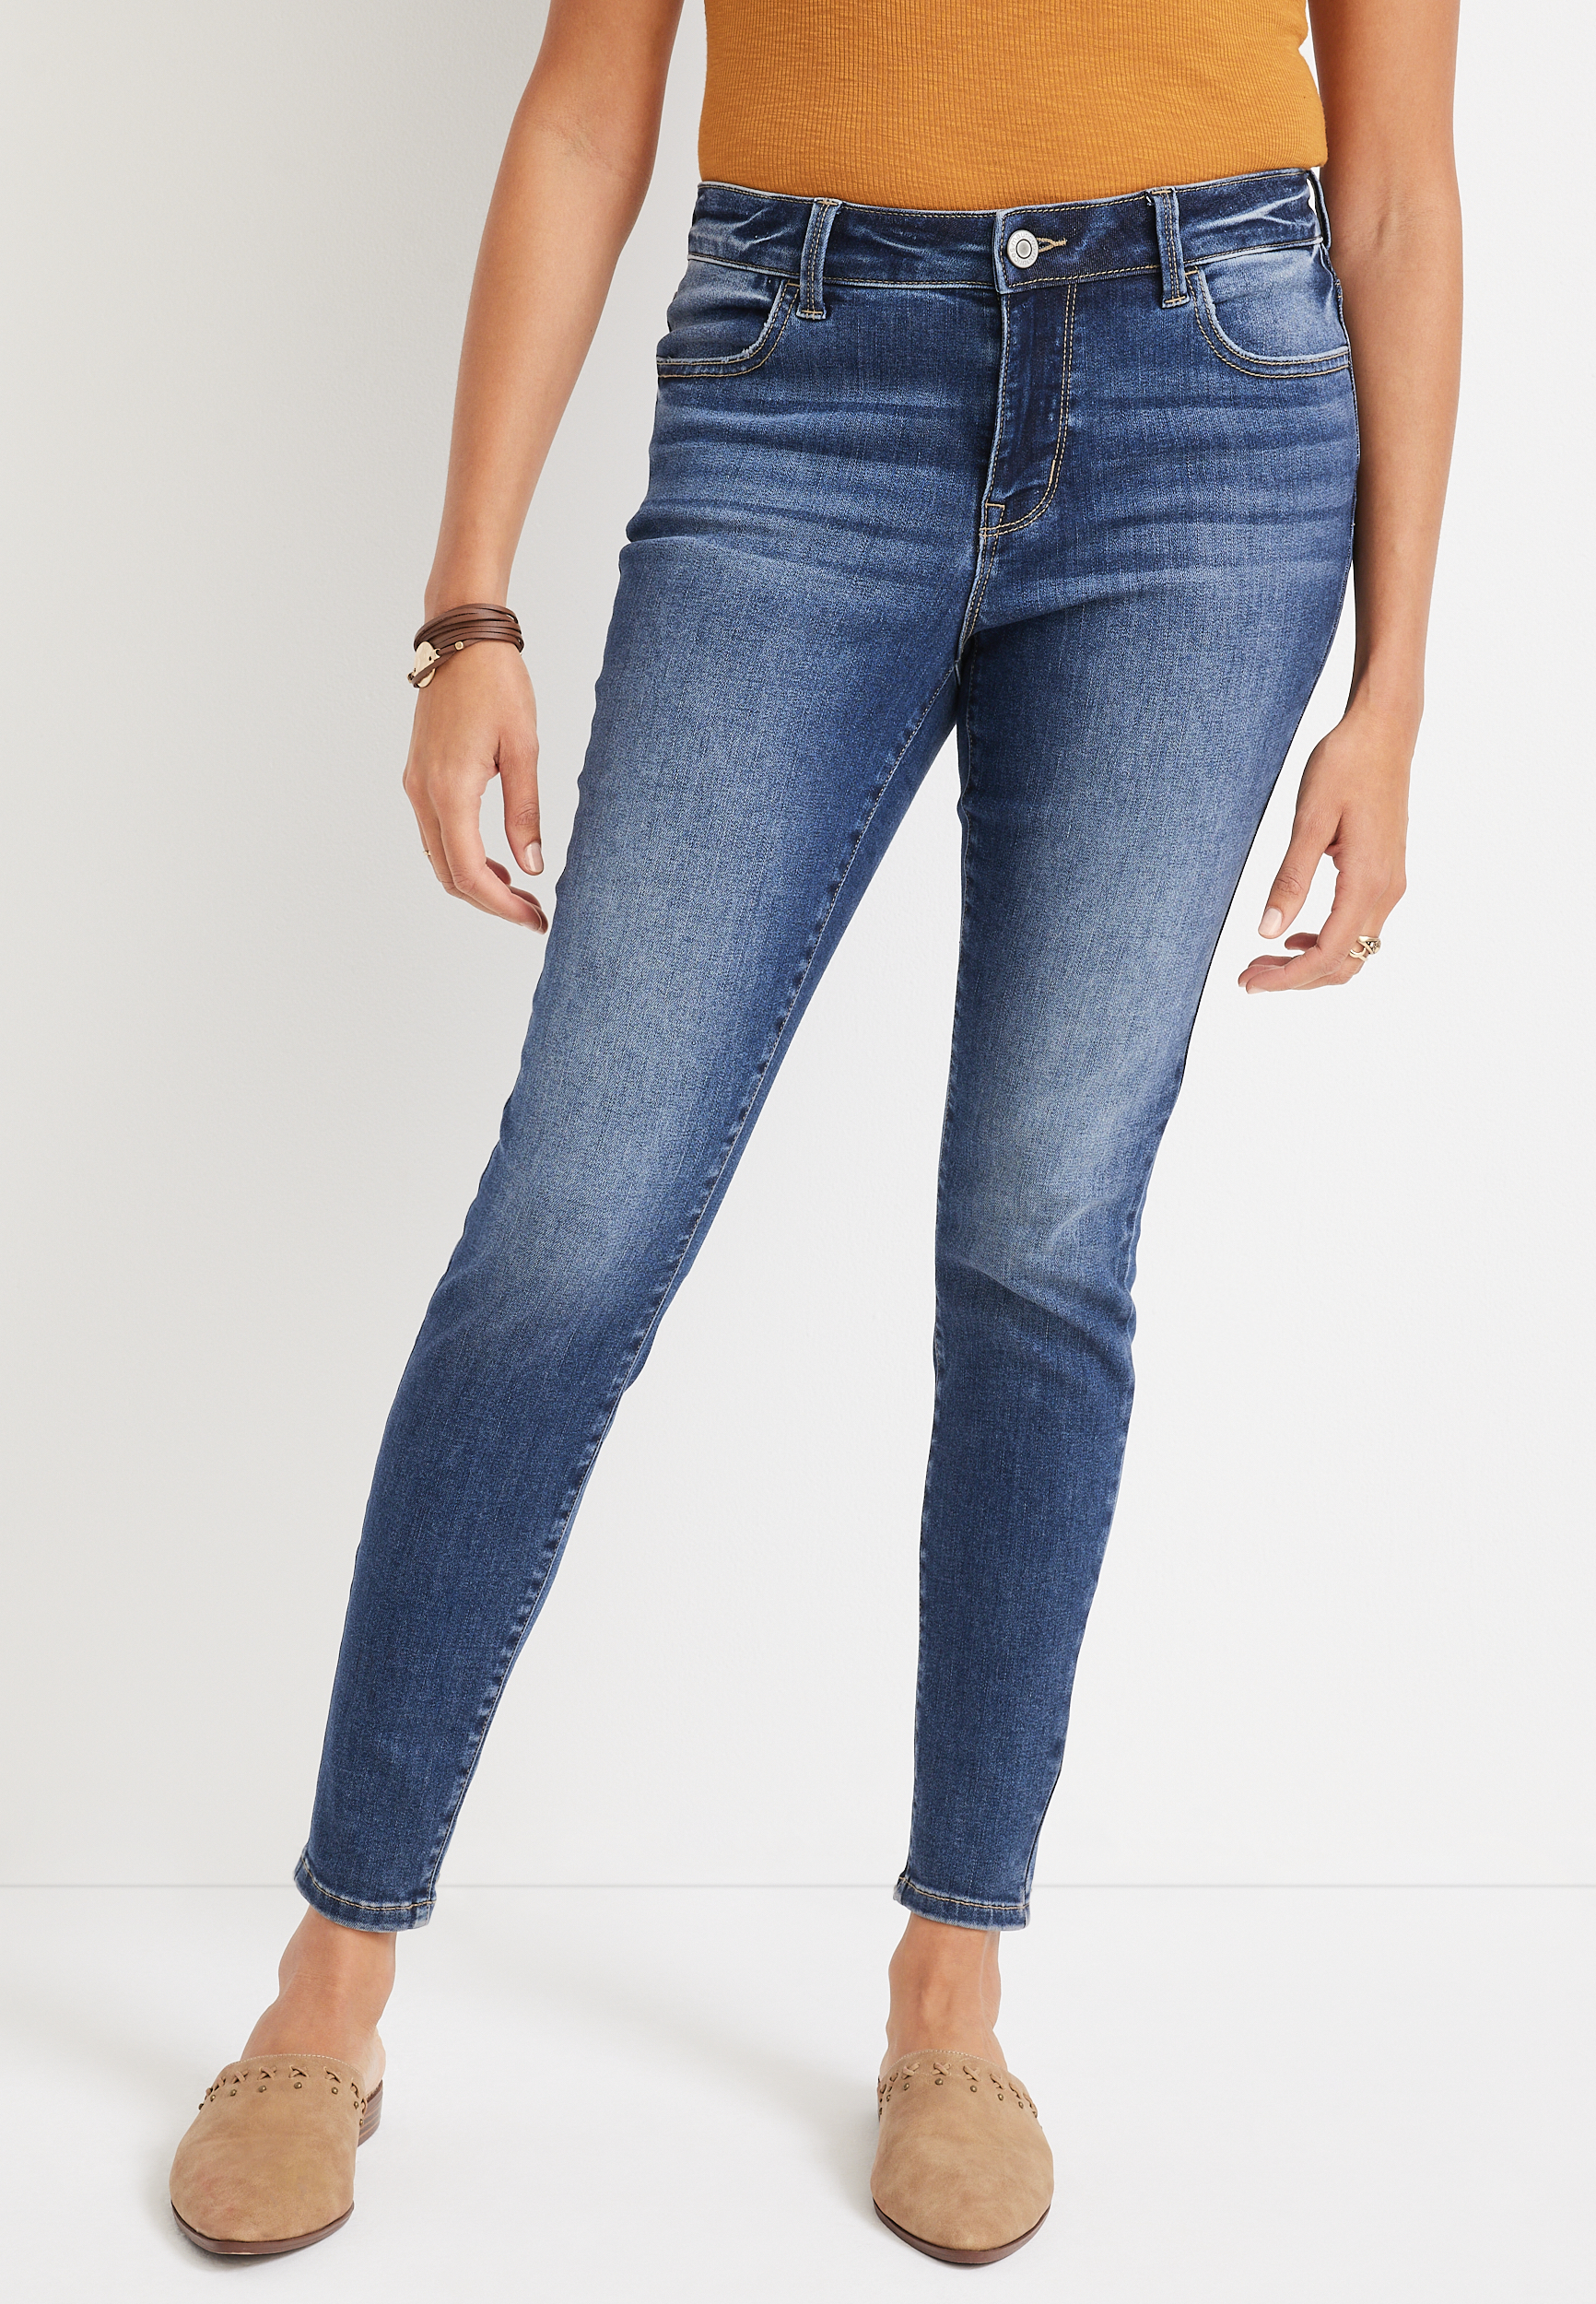 m jeans by mauricesâ¢ Cool Comfort Mid Fit Mid Rise Jegging | maurices